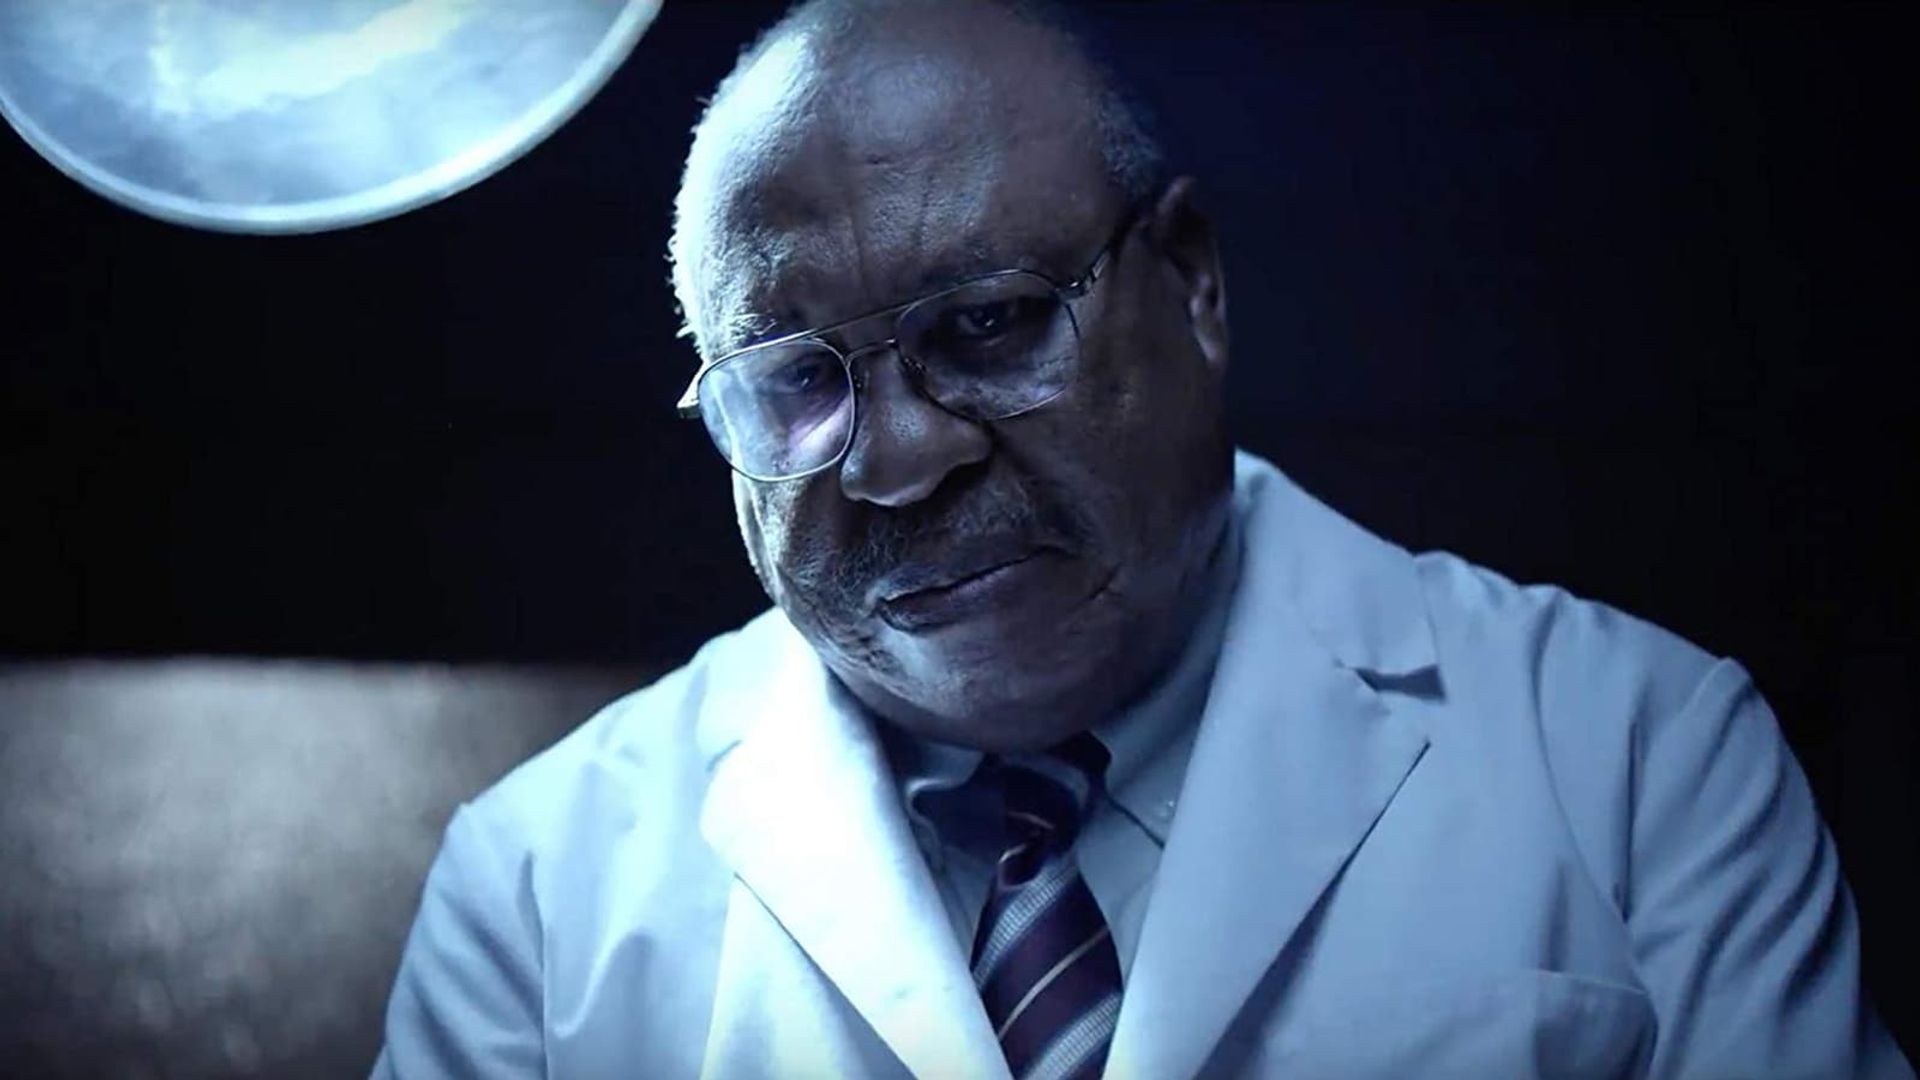 Gosnell: The Trial of America's Biggest Serial Killer background